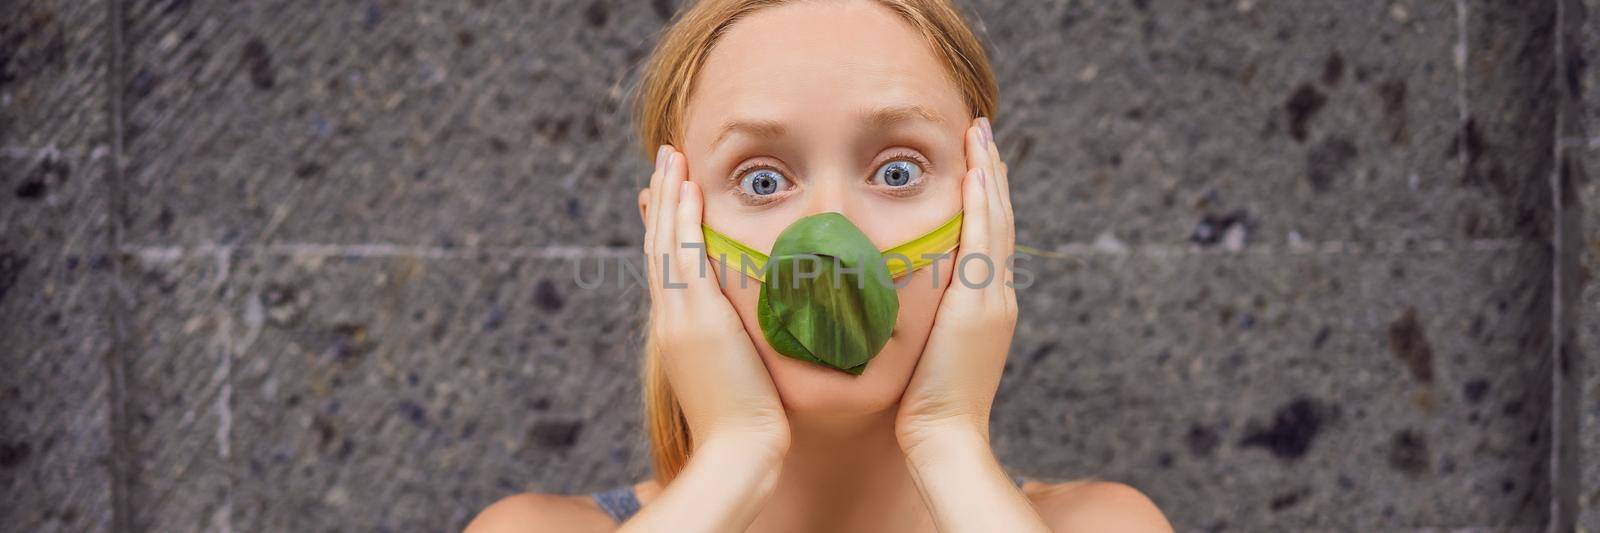 The child made himself a face mask from the leaves to protect himself from air pollution. Air purification. Trees purify the air concept. BANNER, LONG FORMAT